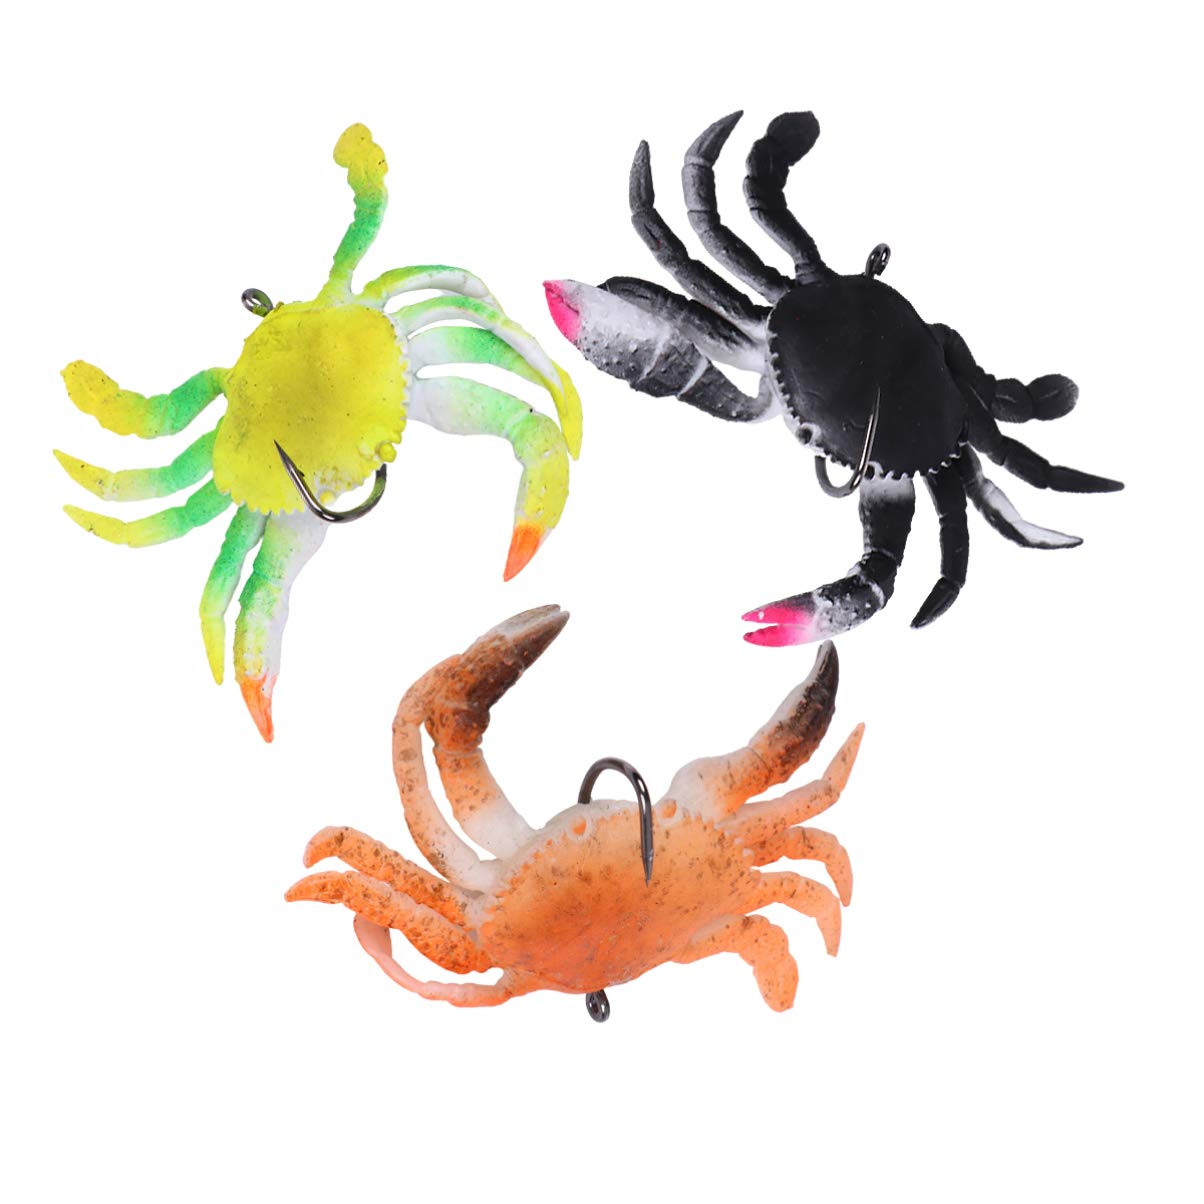 3 Pack Soft Fish Fishing Crab Lures Bait with Hooks Simulation  SaltwaterLure Fishing Tackle Accessory Tool